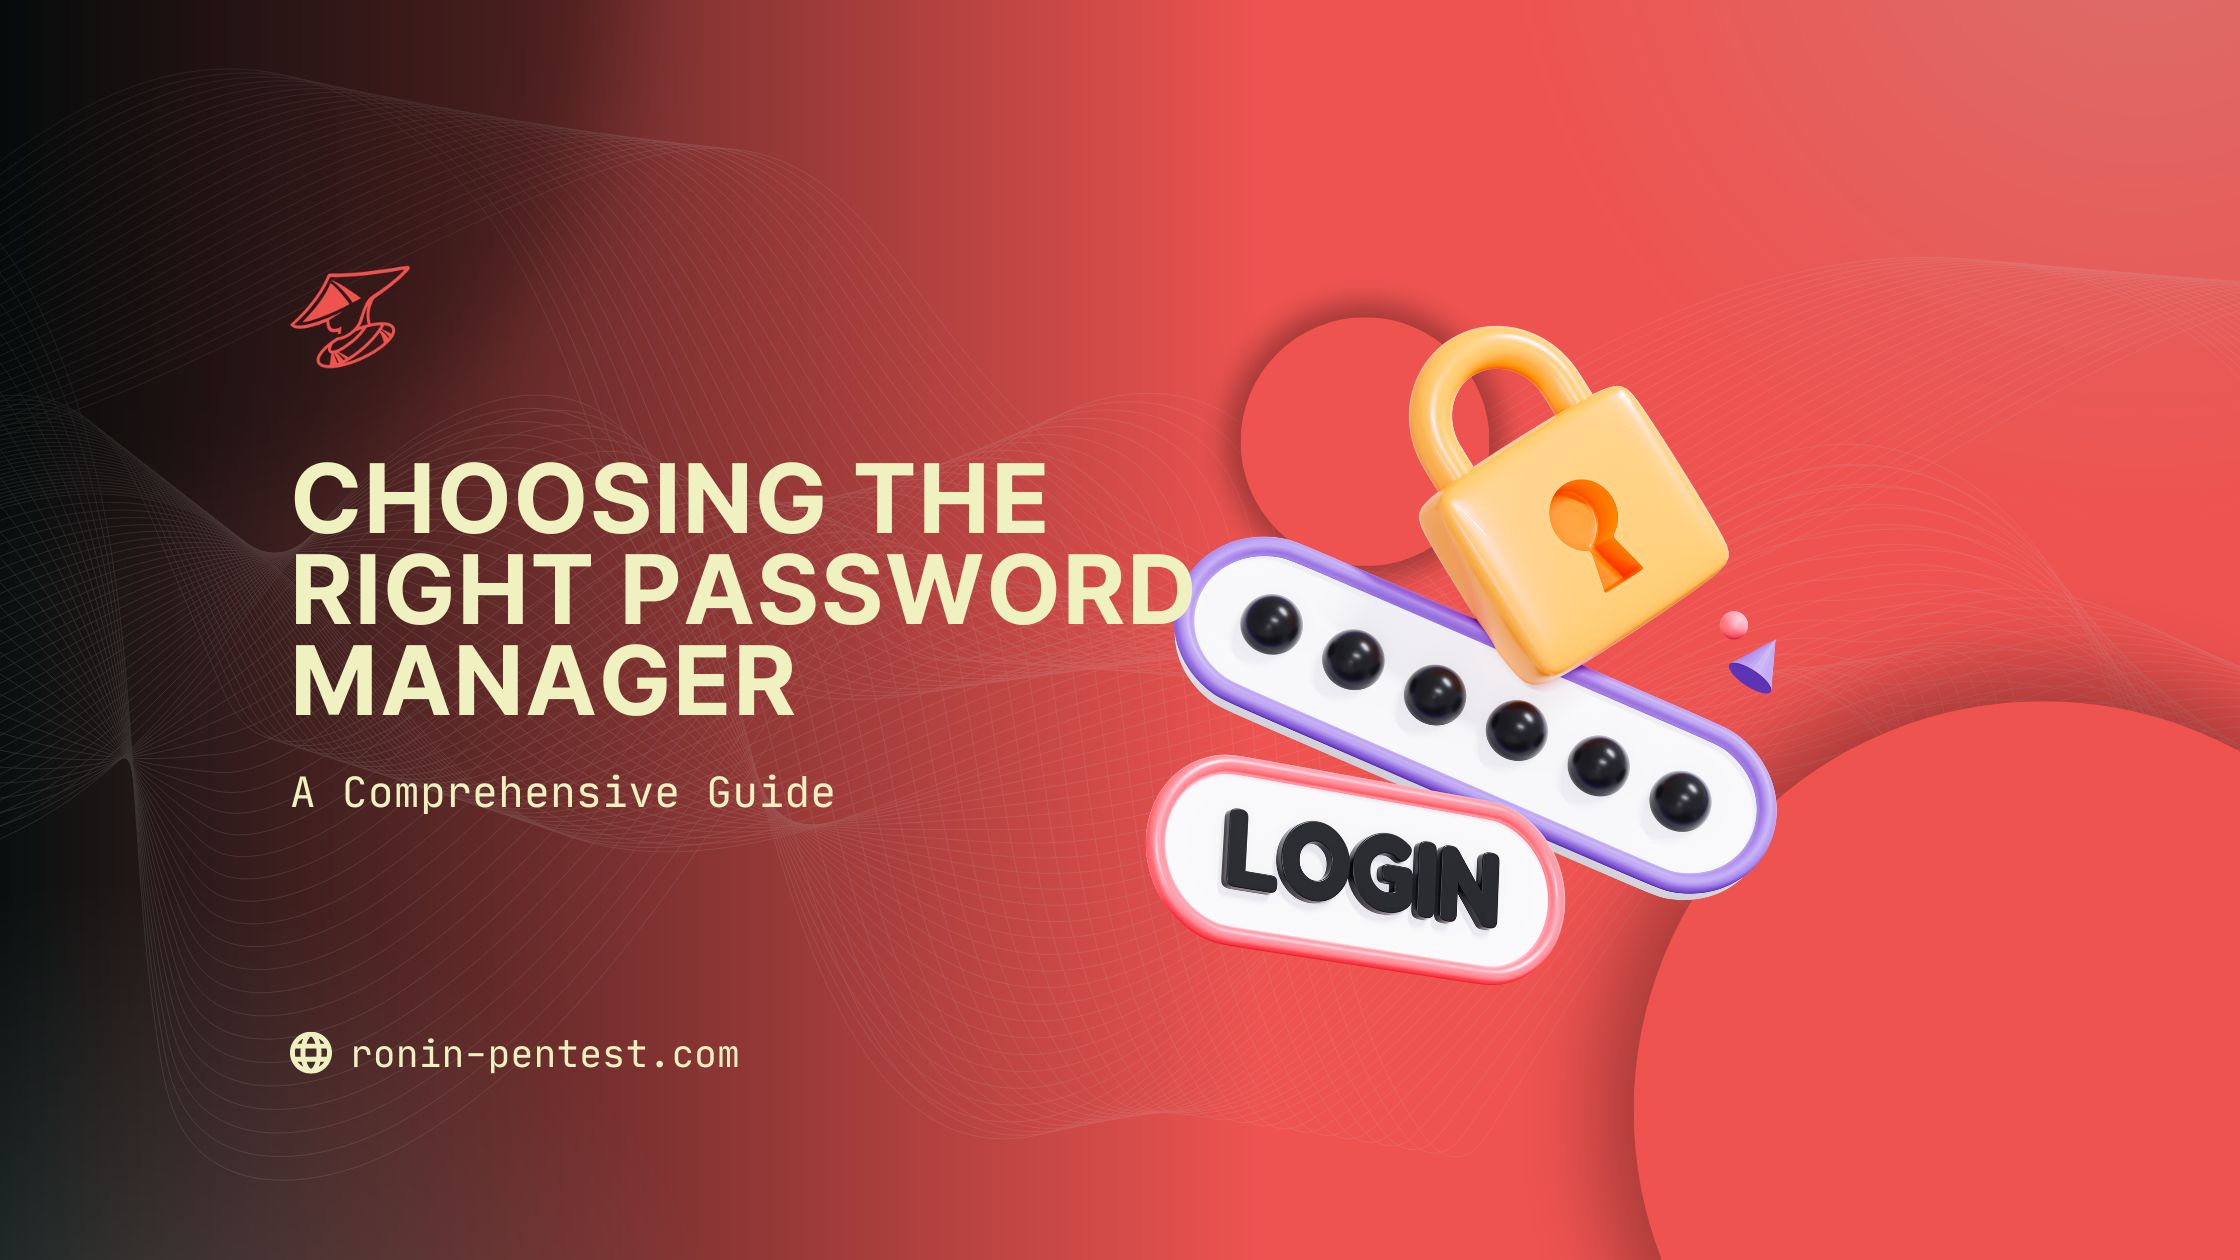 Ronin-Pentest | {Choosing the Right Password Manager: A Comprehensive Guide}